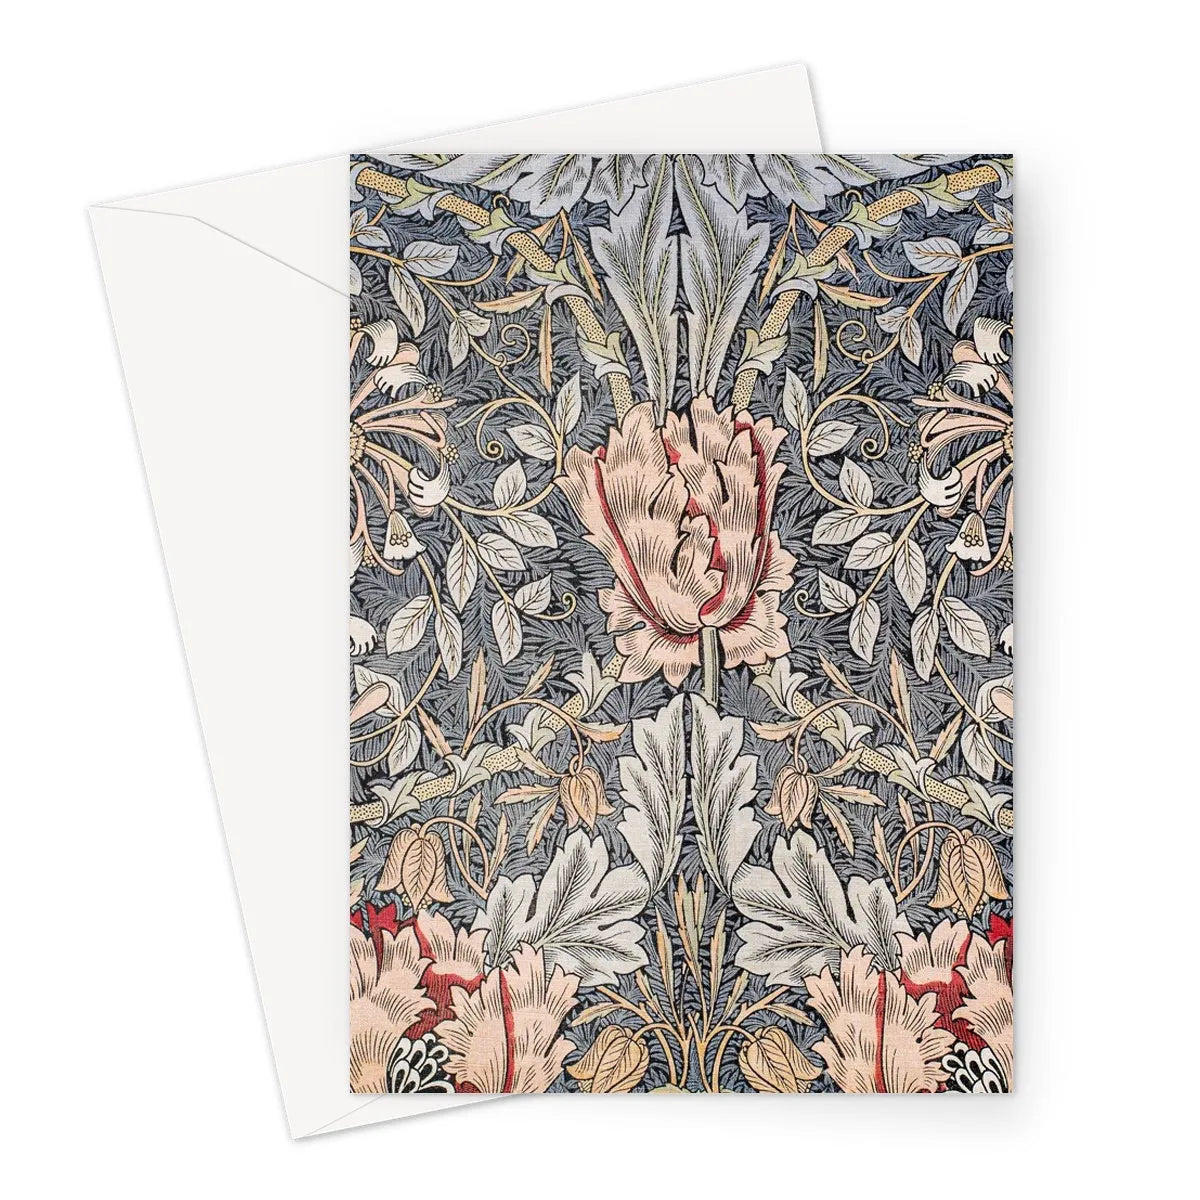 Honeysuckle By William Morris Greeting Card - A5 Portrait / 1 Card - Aesthetic Art